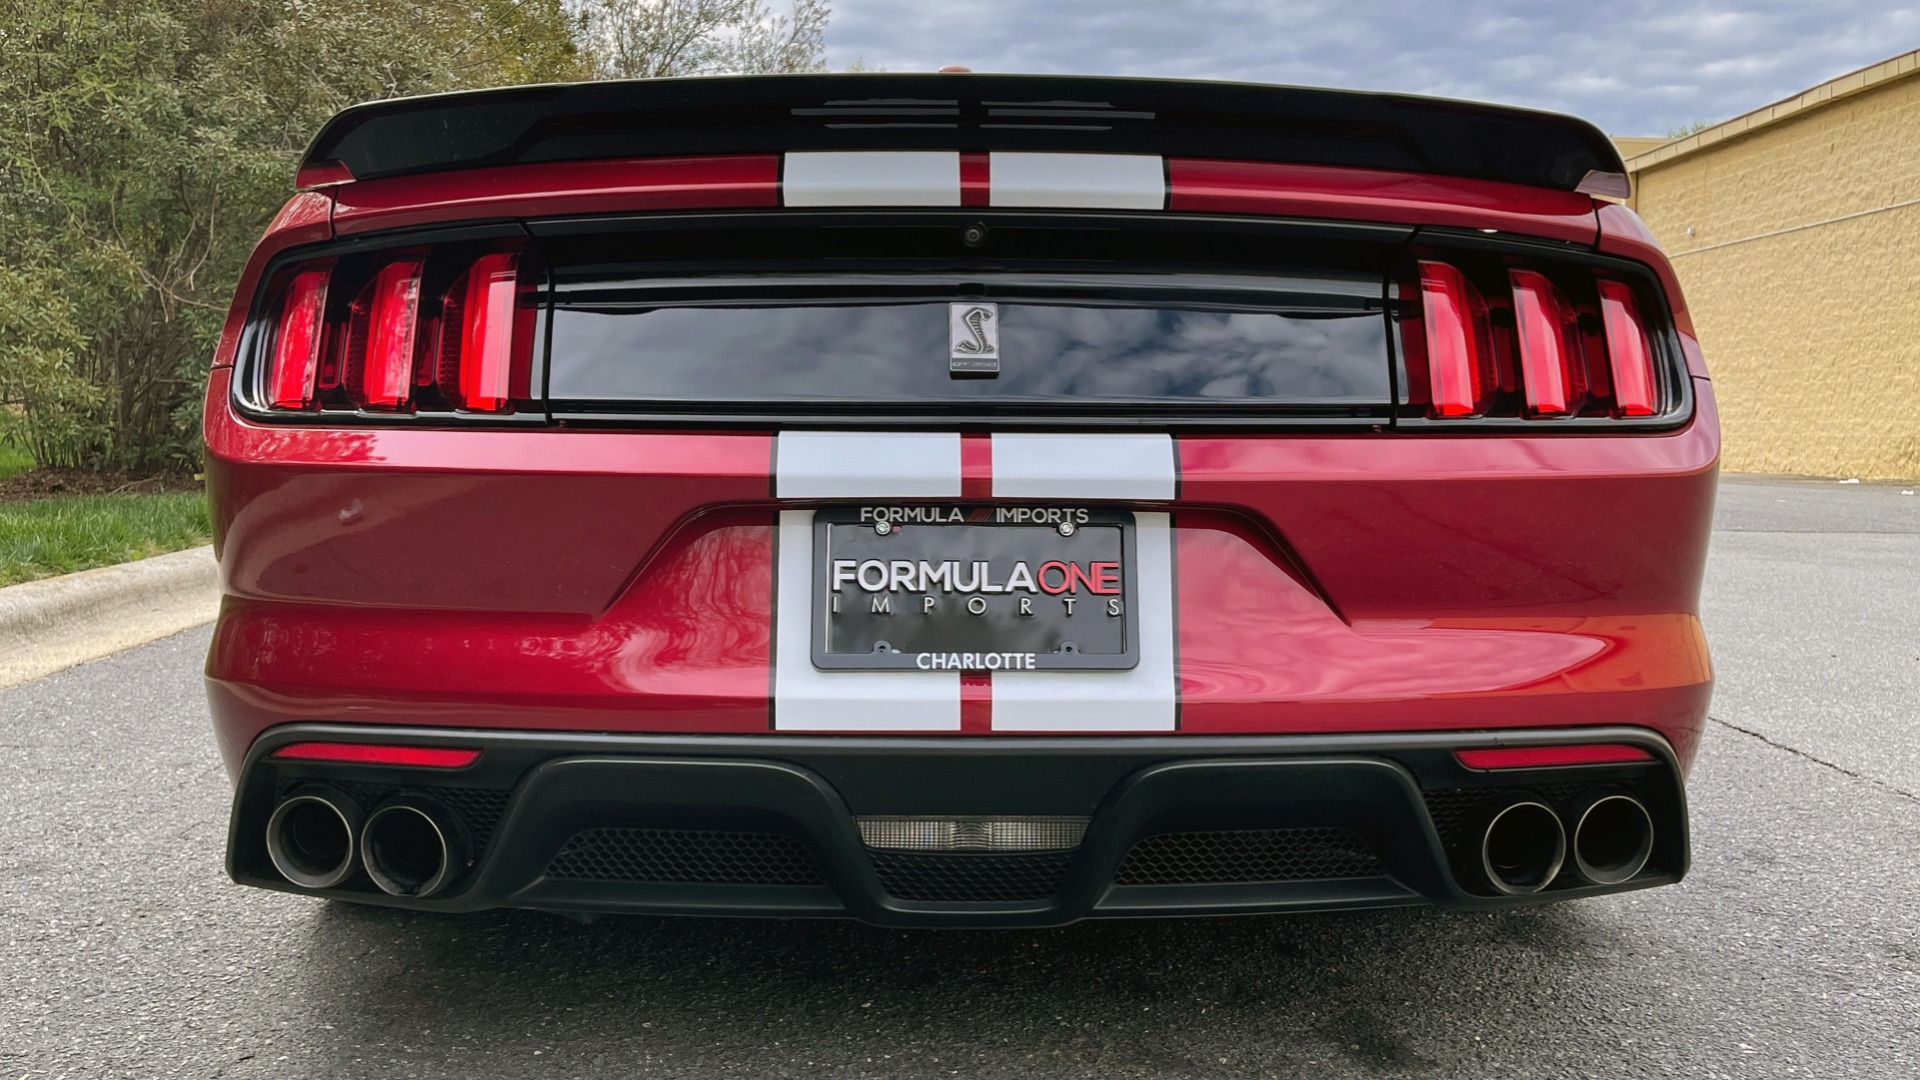 Used 2017 Ford MUSTANG SHELBY GT350 COUPE / 526HP / 6-SPD MAN / NAV / SHAKER SND / REARVIEW for sale Sold at Formula Imports in Charlotte NC 28227 12